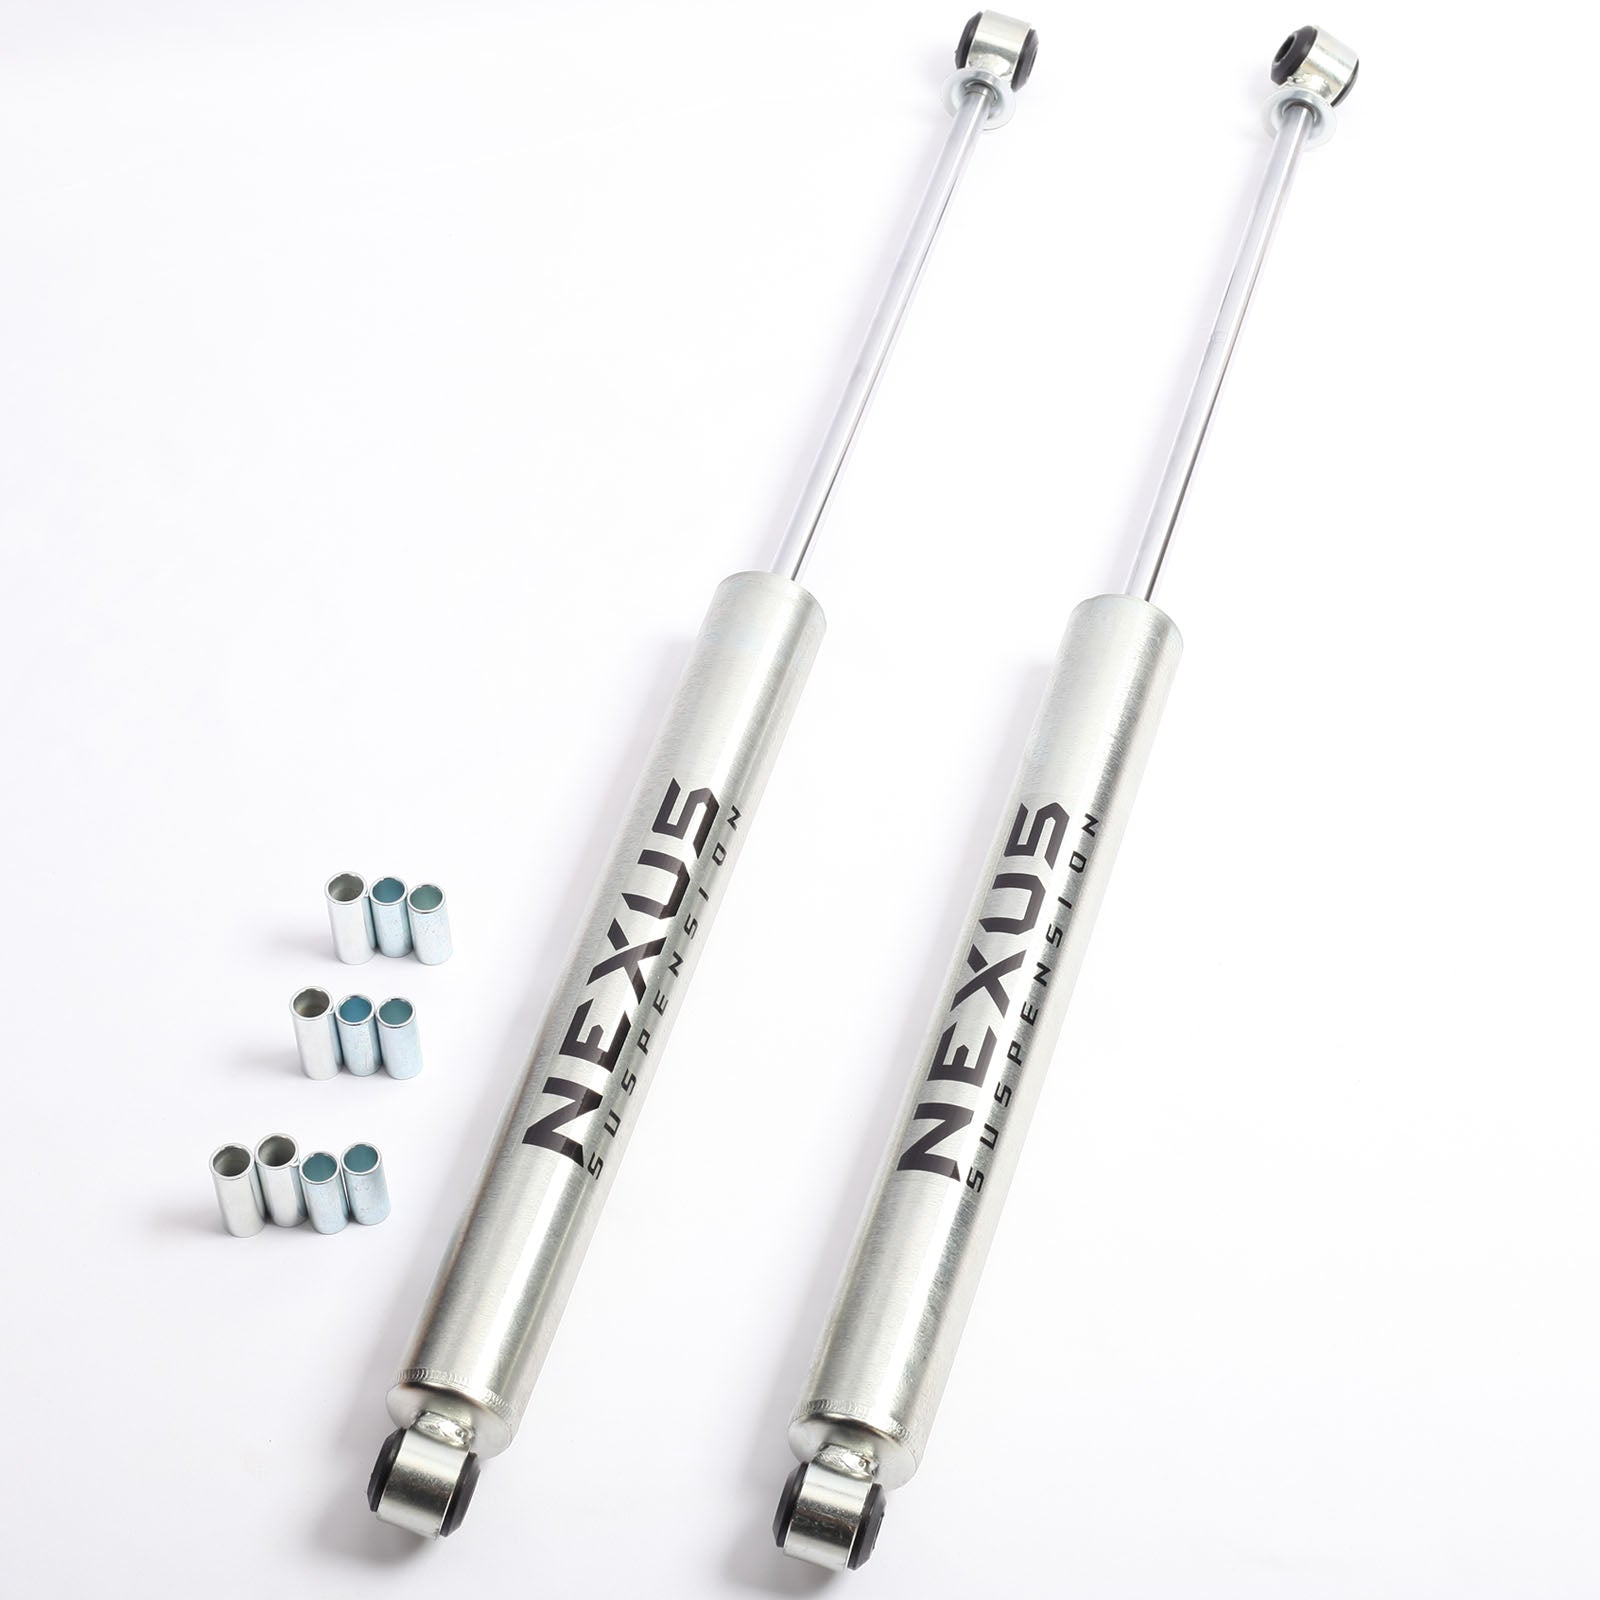 NEXUS SUSPENSION 4 Inch Lift Rear Shock Absorber for Ford F-250/F-350 2005-2007,Zinc Plated Coating,Pair Pack